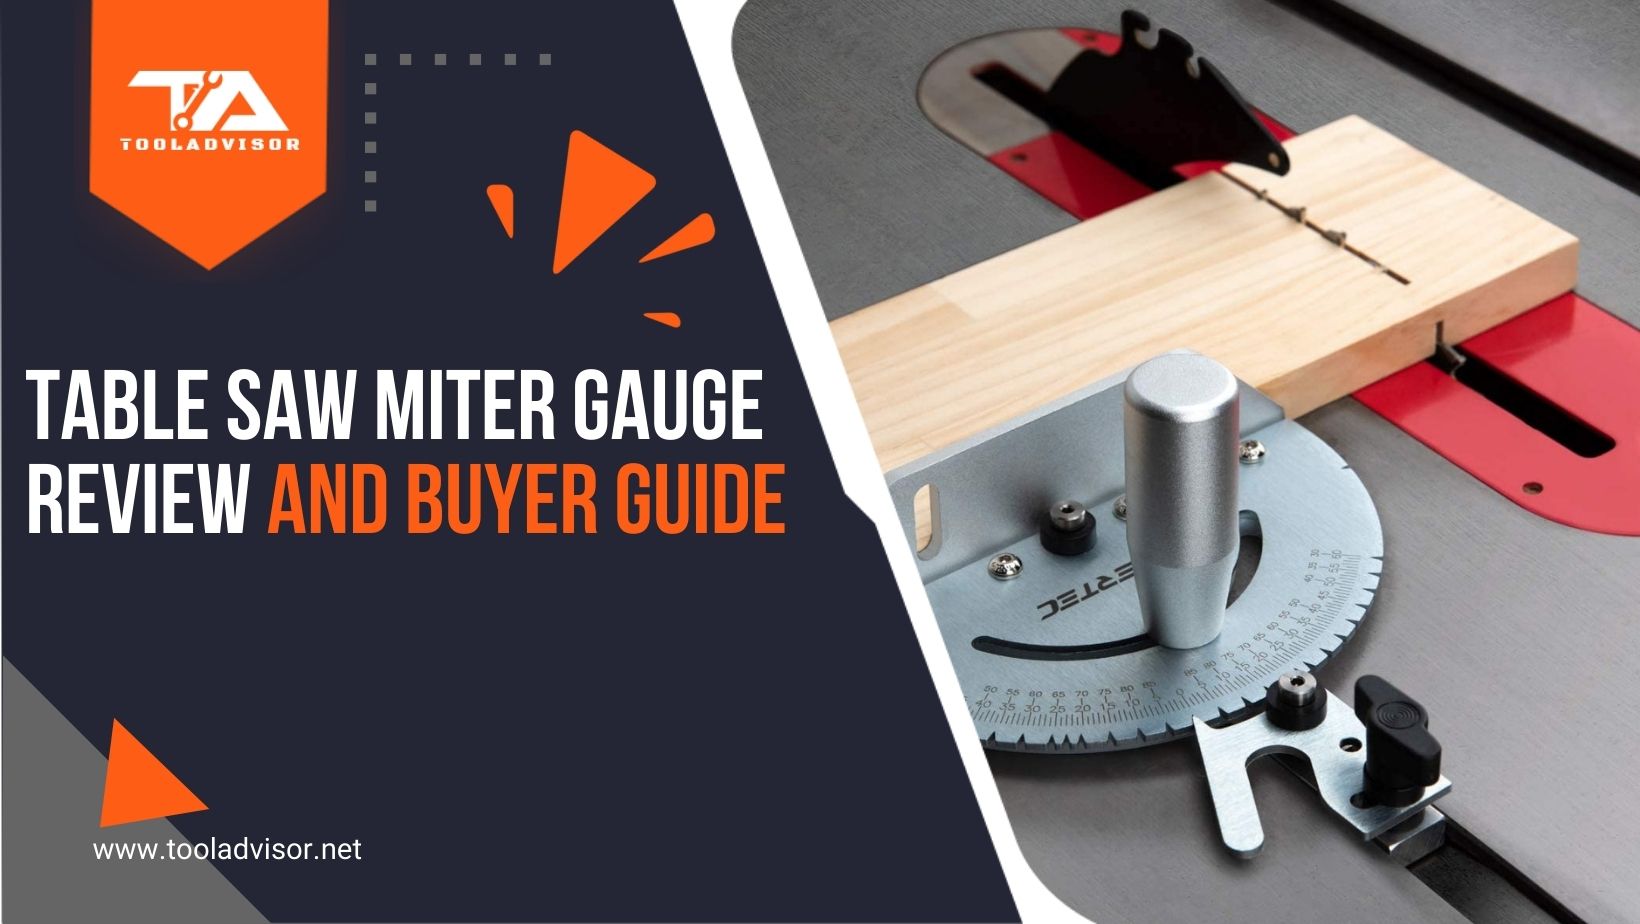 Best Table Saw Miter Gauge Review And Buyer Guide 2020